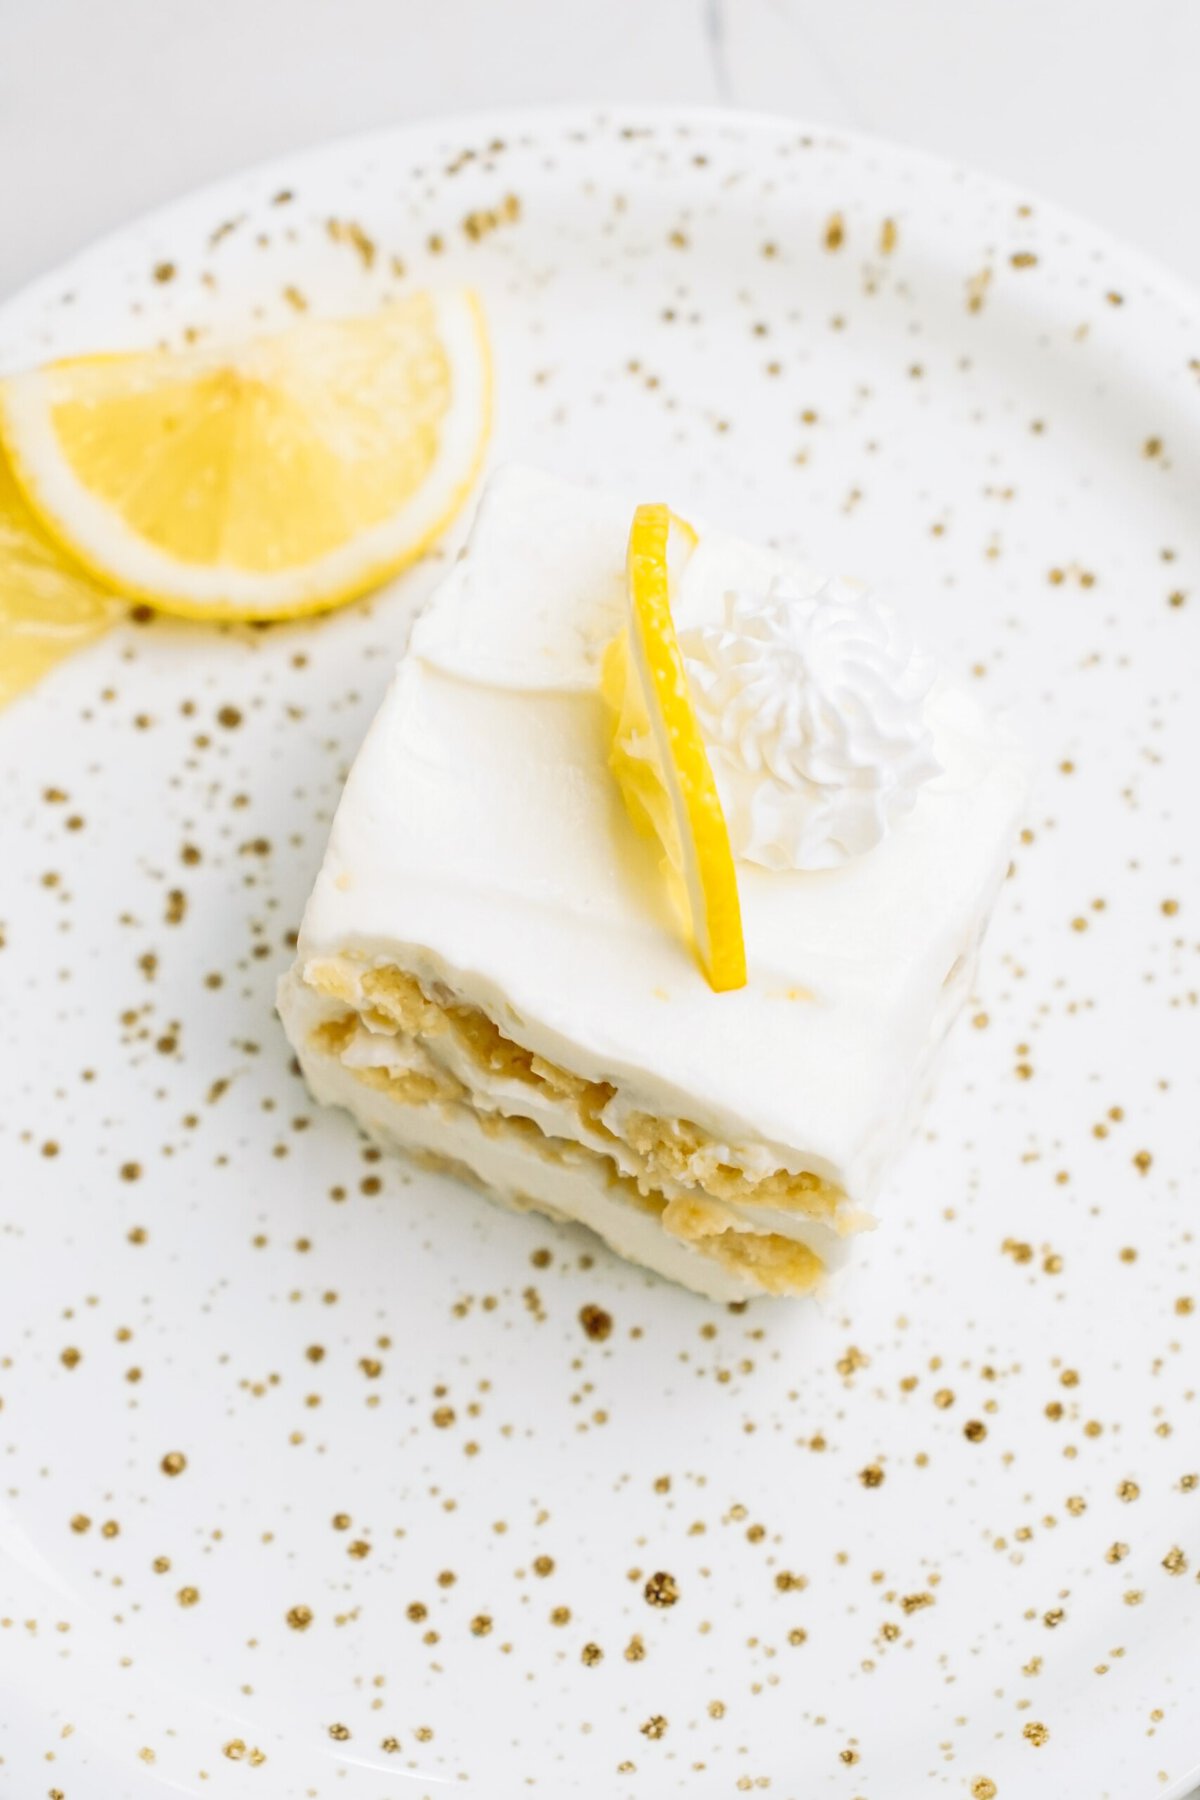 A slice of lemon cake with white frosting, garnished with a lemon peel and whipped cream on a white plate sprinkled with gold-colored sugar.